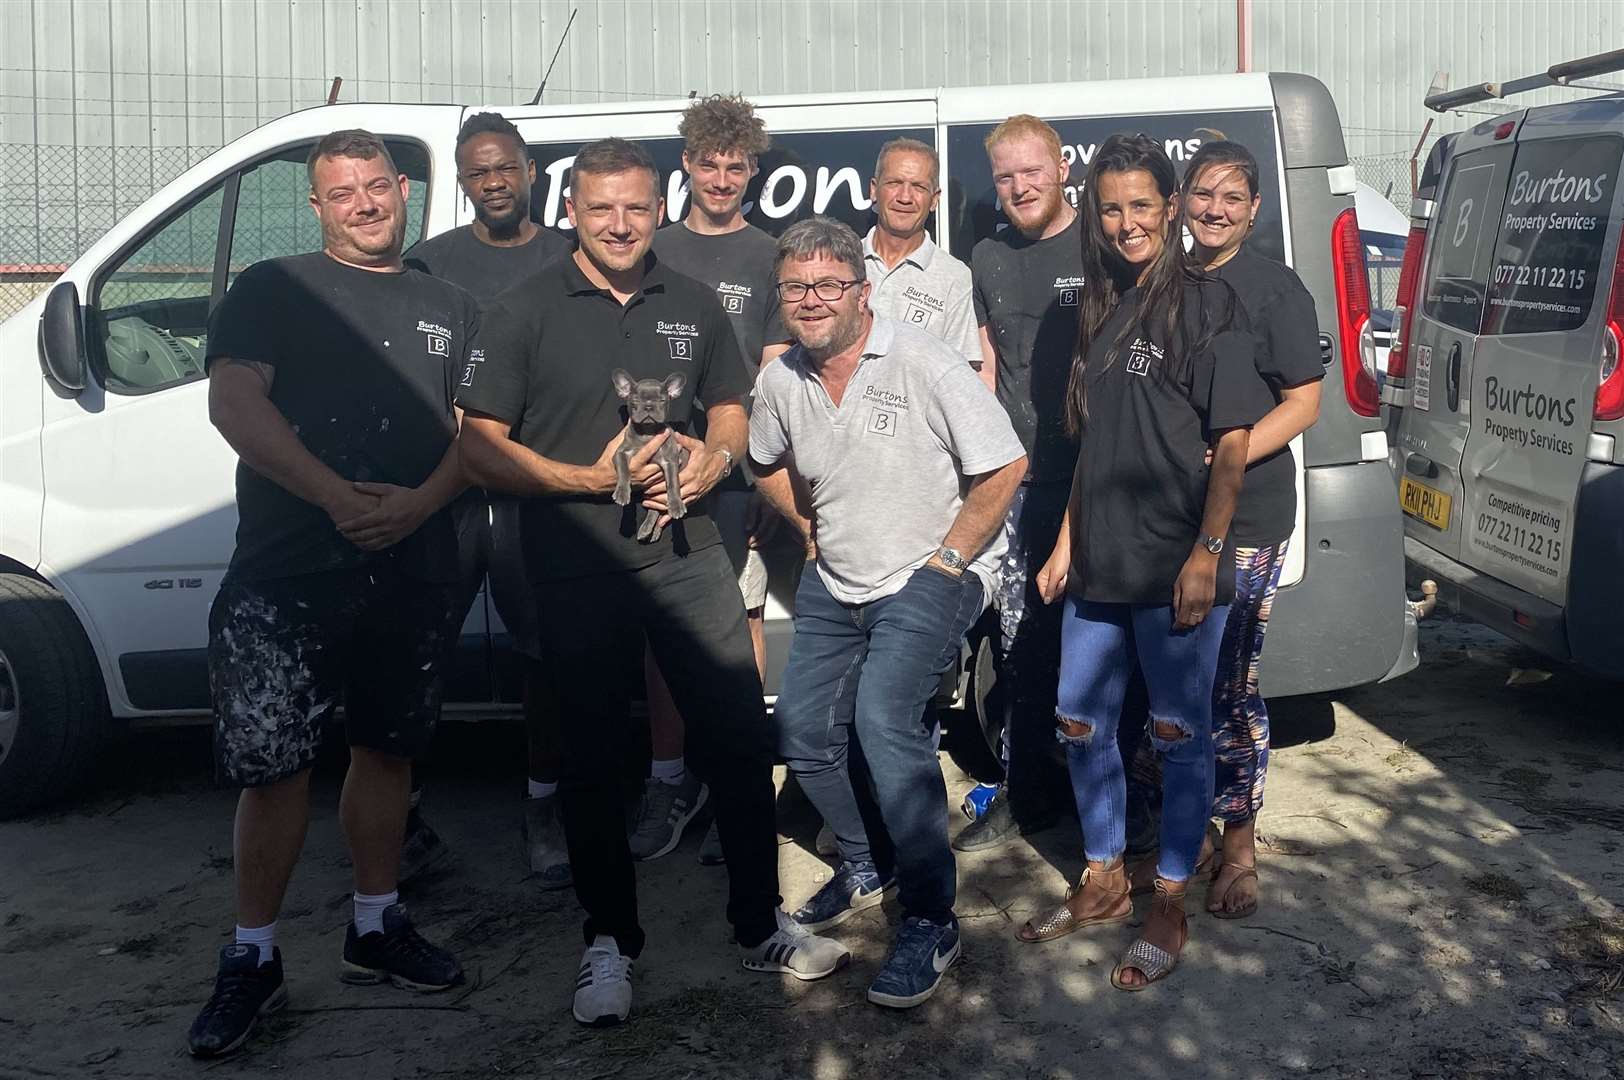 The Burtons Property Services team, in Sittingbourne, which is offering a free DIY SOS-style project for people in need